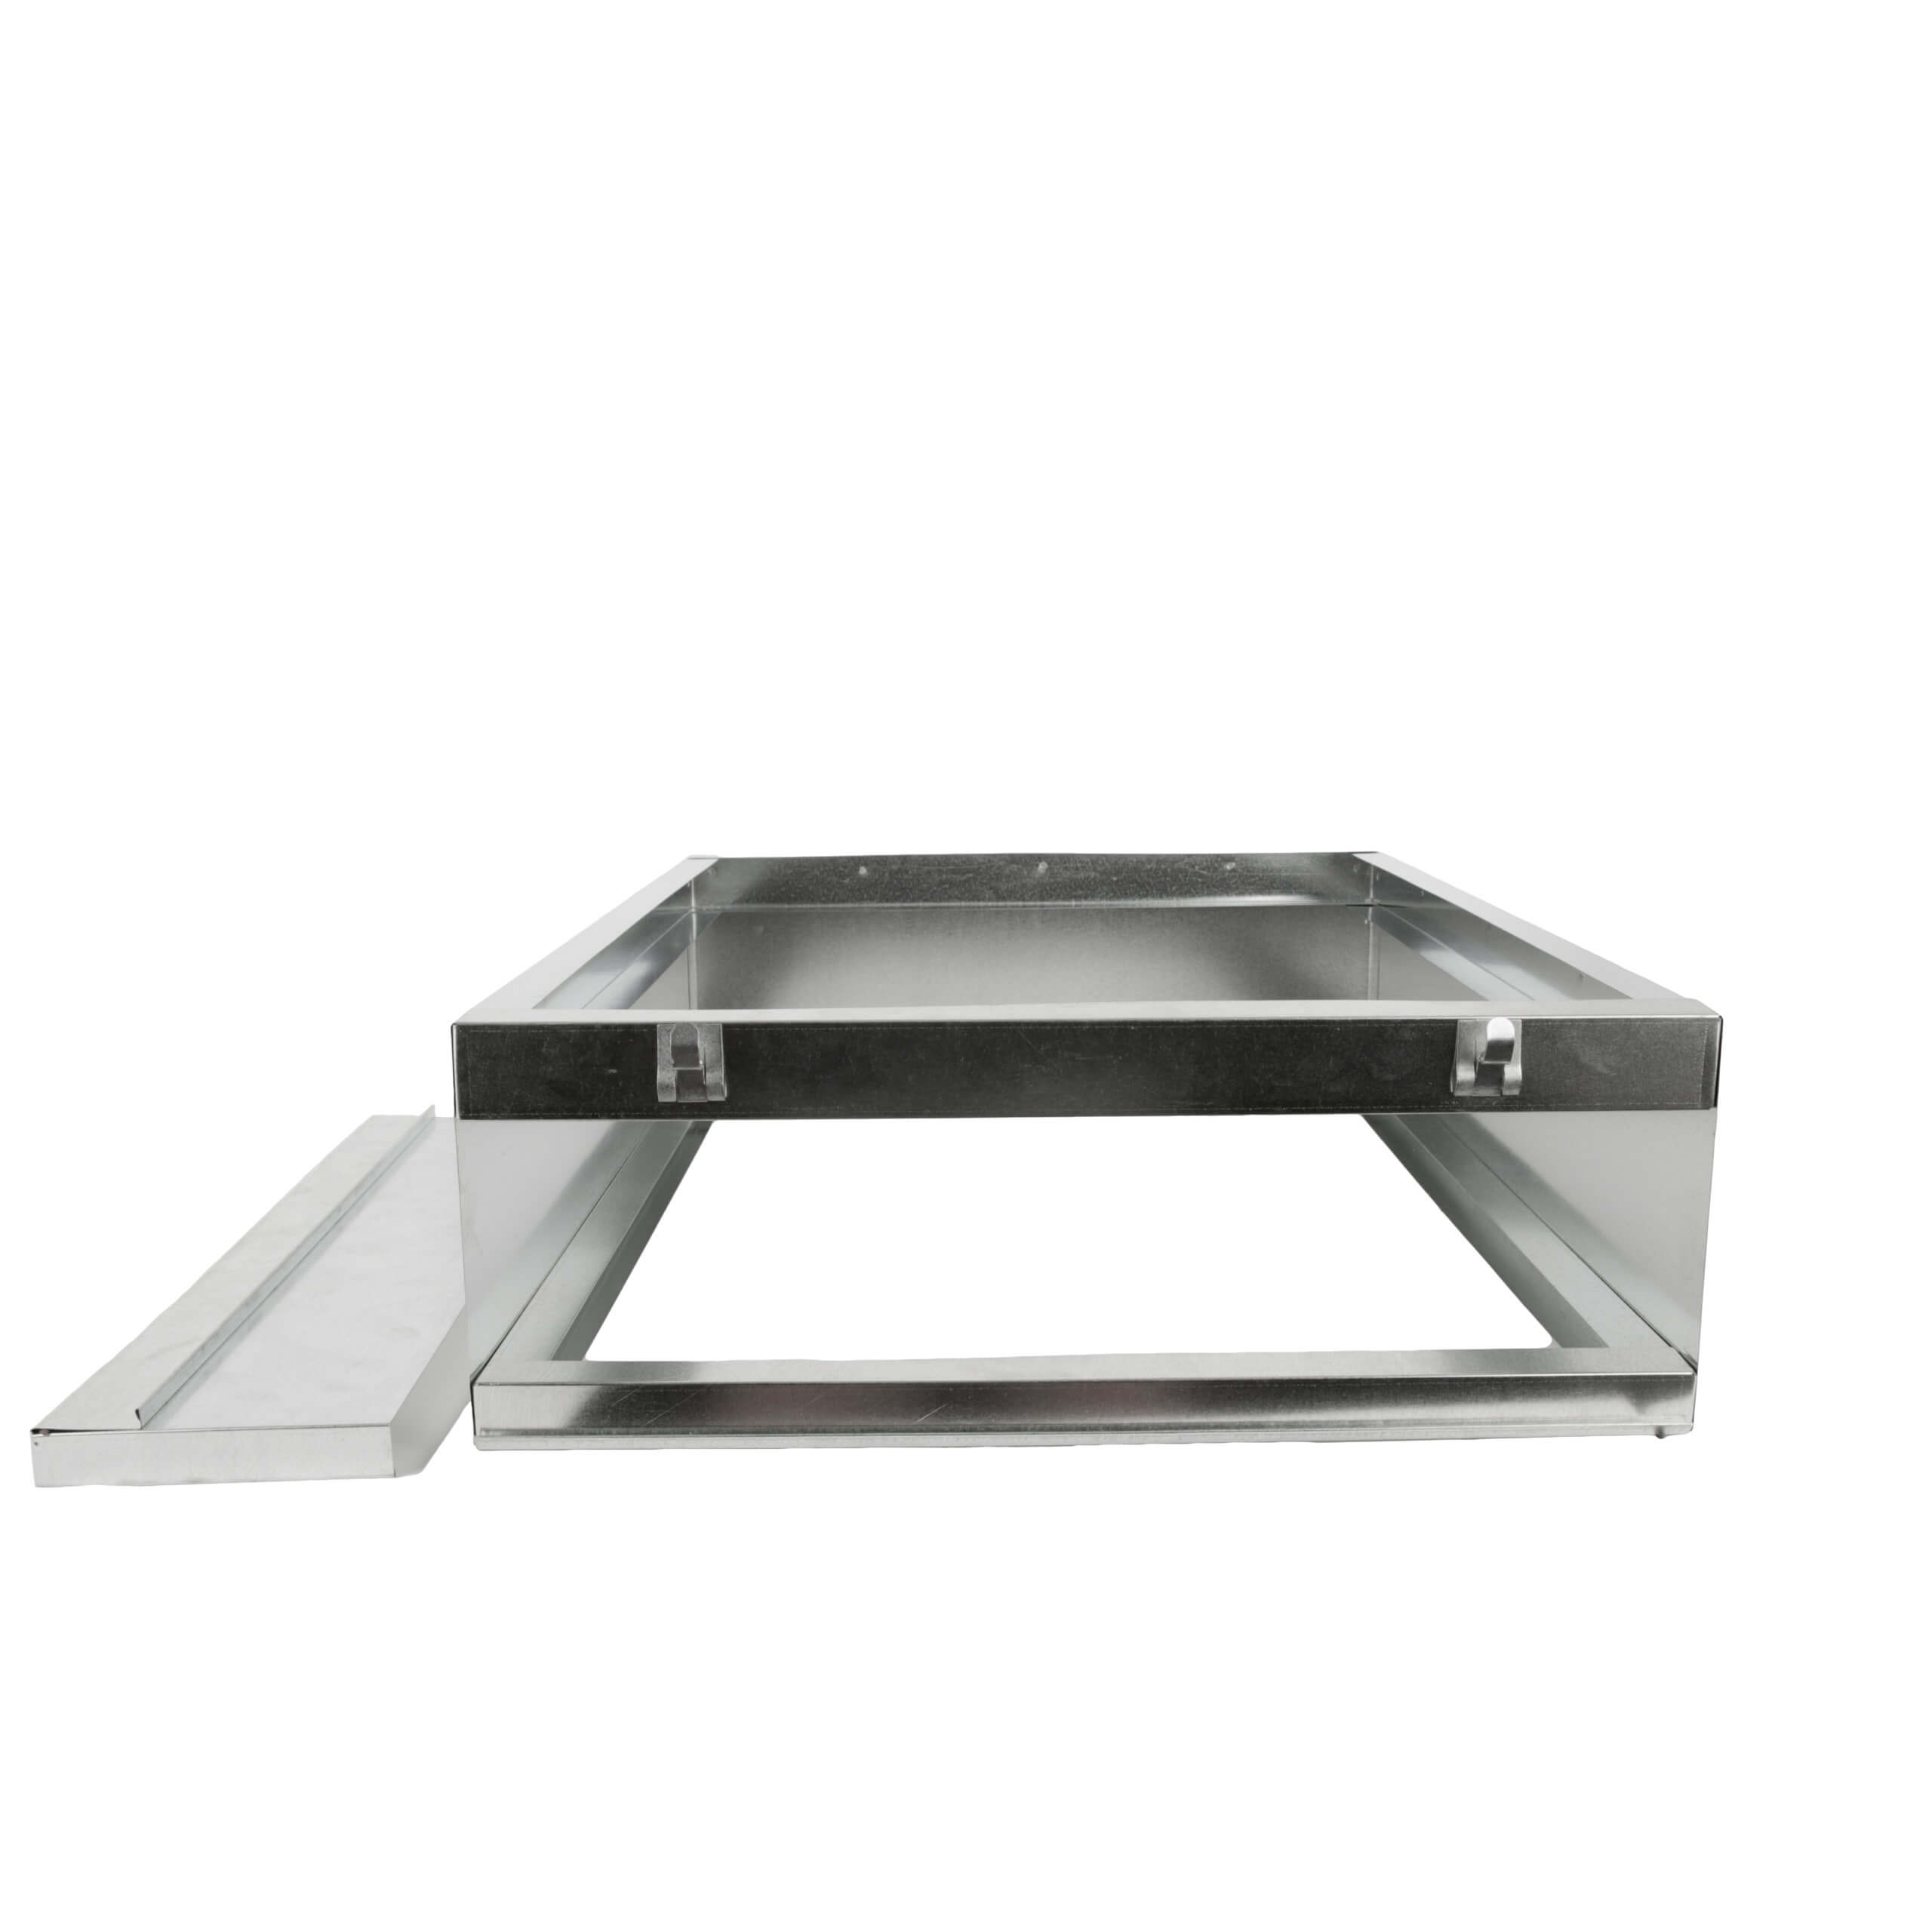 FAMCO Furnace Filter Rack - Galvanized Steel (Front View)